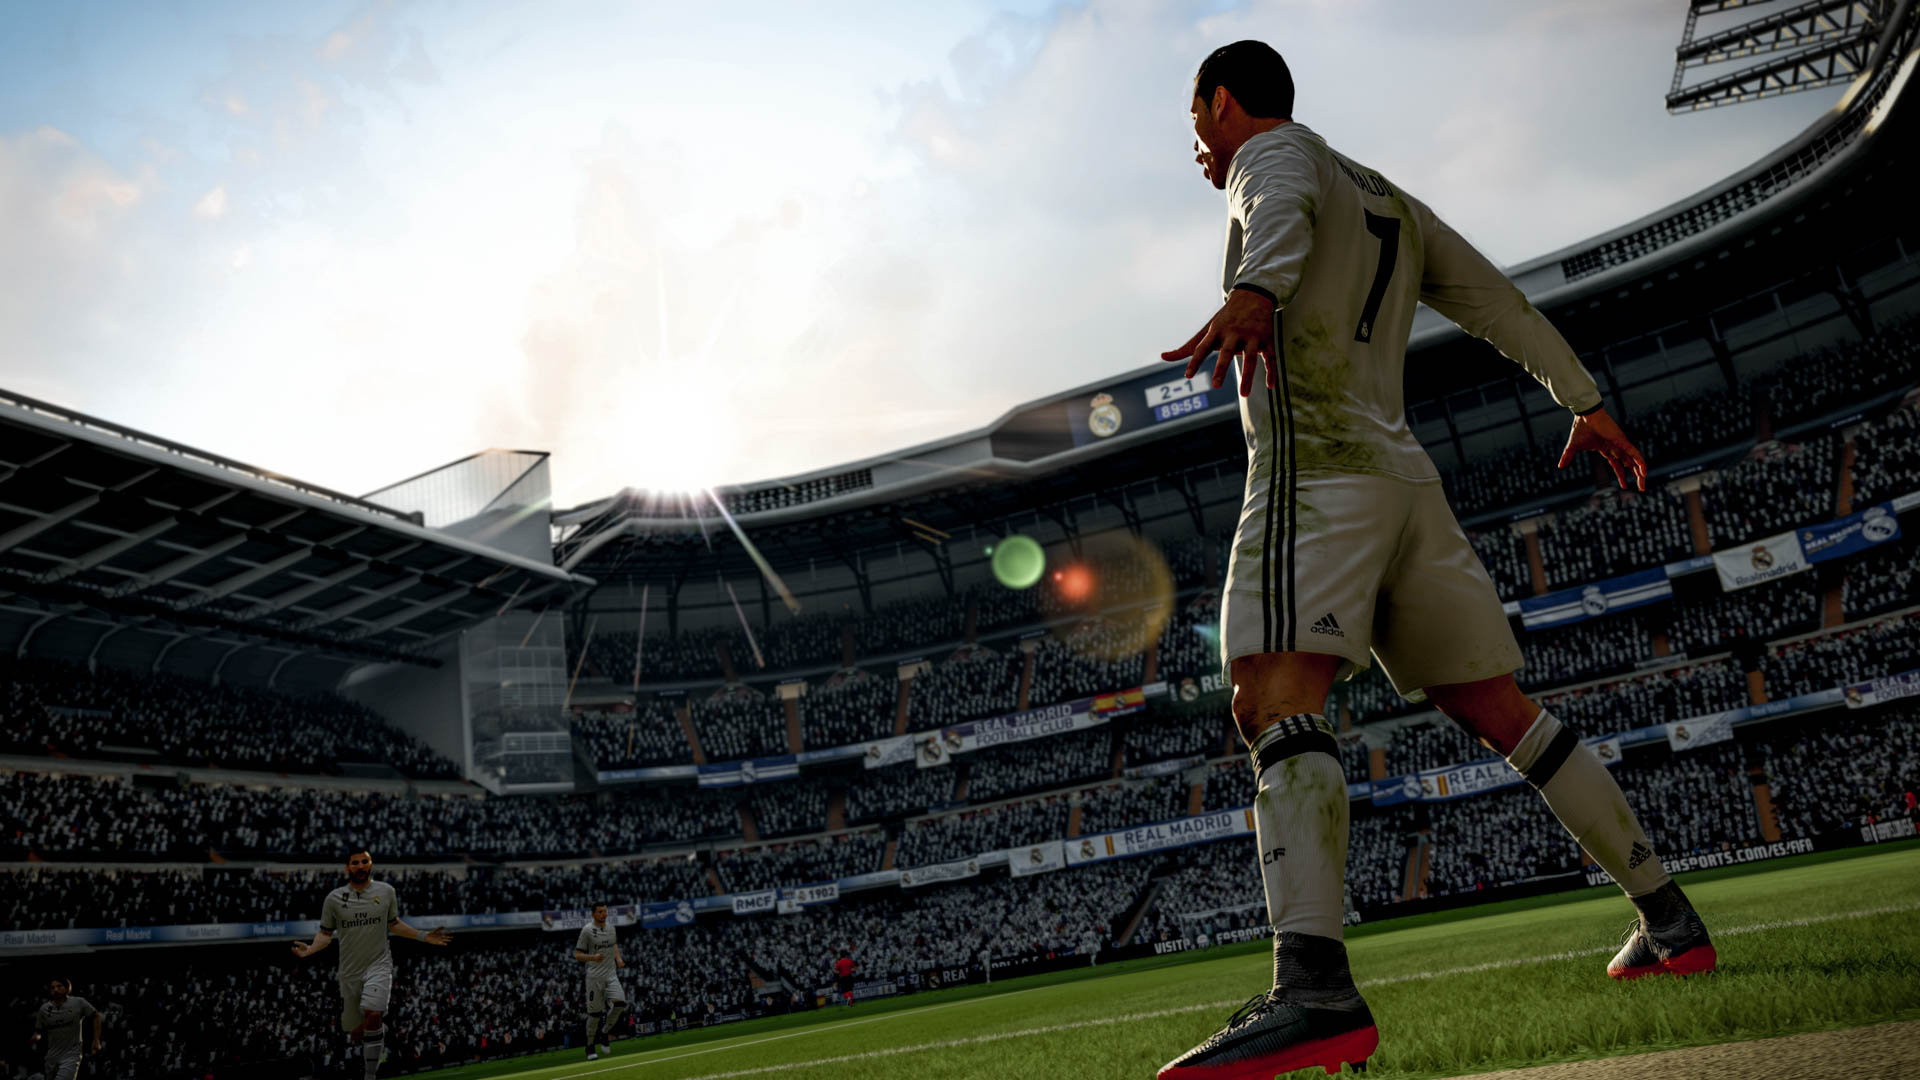 FIFA in high definition, Striking visuals, Dynamic action, Iconic football moments, 1920x1080 Full HD Desktop